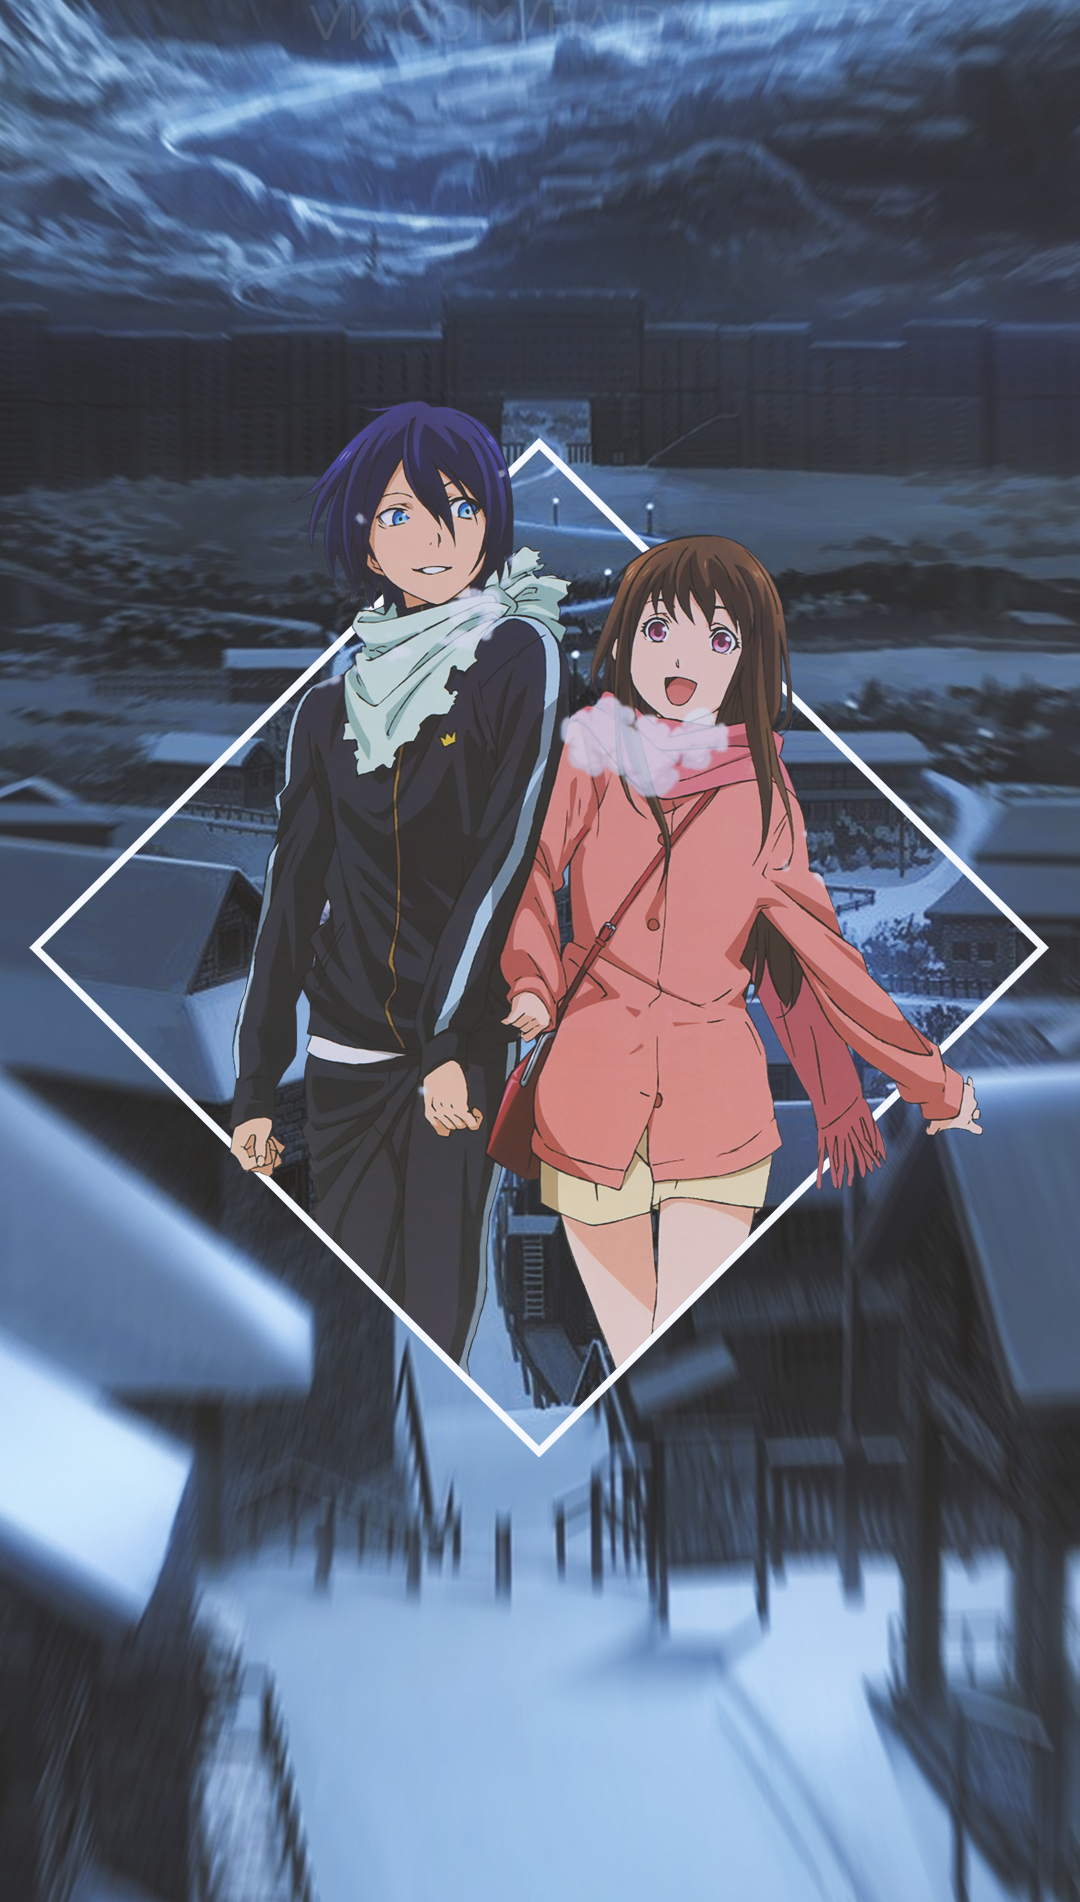 Anime 1080x1902 anime girls picture-in-picture anime Yato (Noragami) Yukine (Noragami) Noragami anime boys